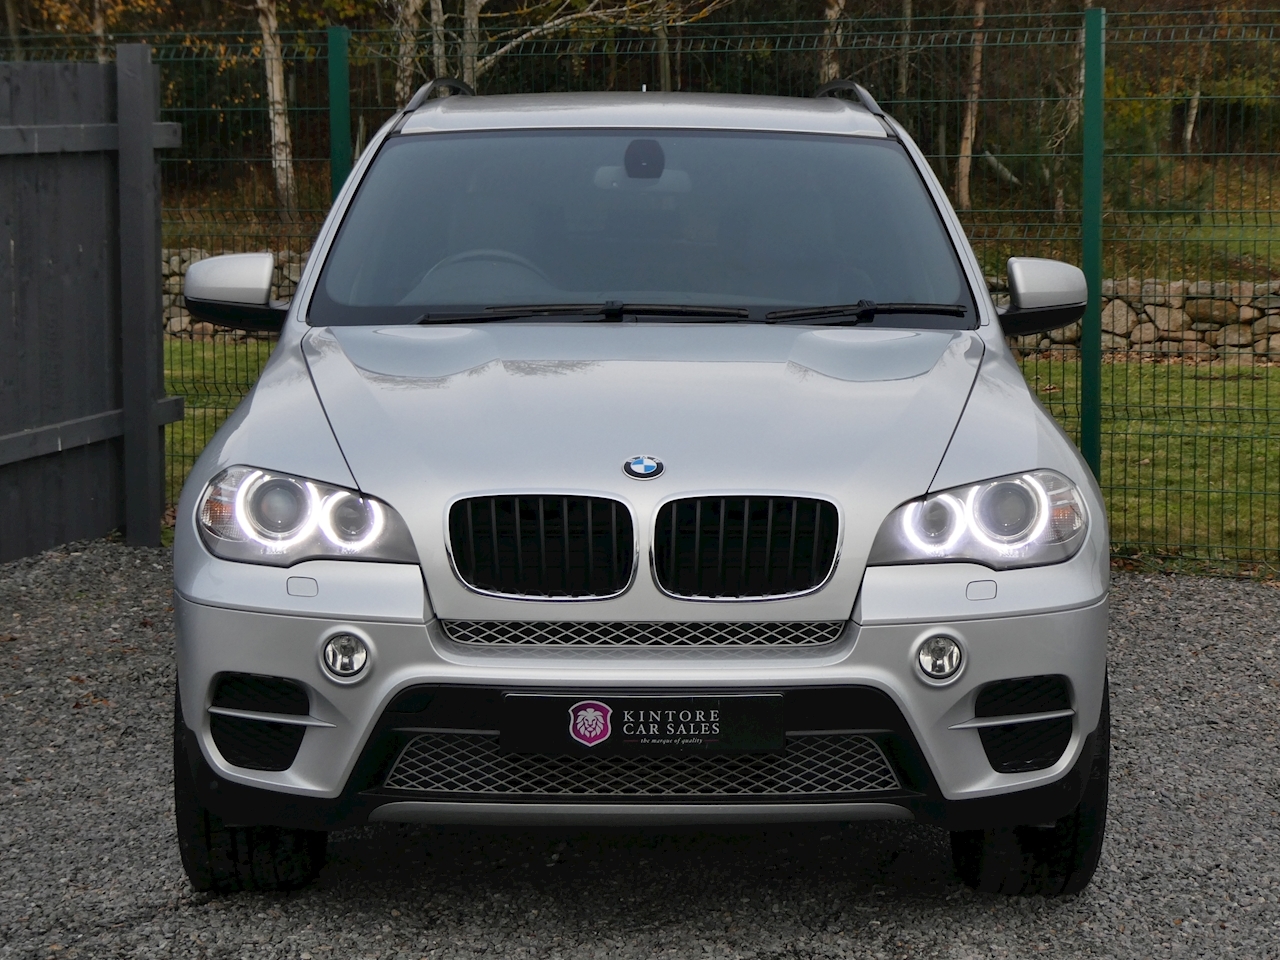 X5 30d 3.0 SE xDrive, Automatic (7 Seats) 3.0 5dr SUV Automatic Diesel